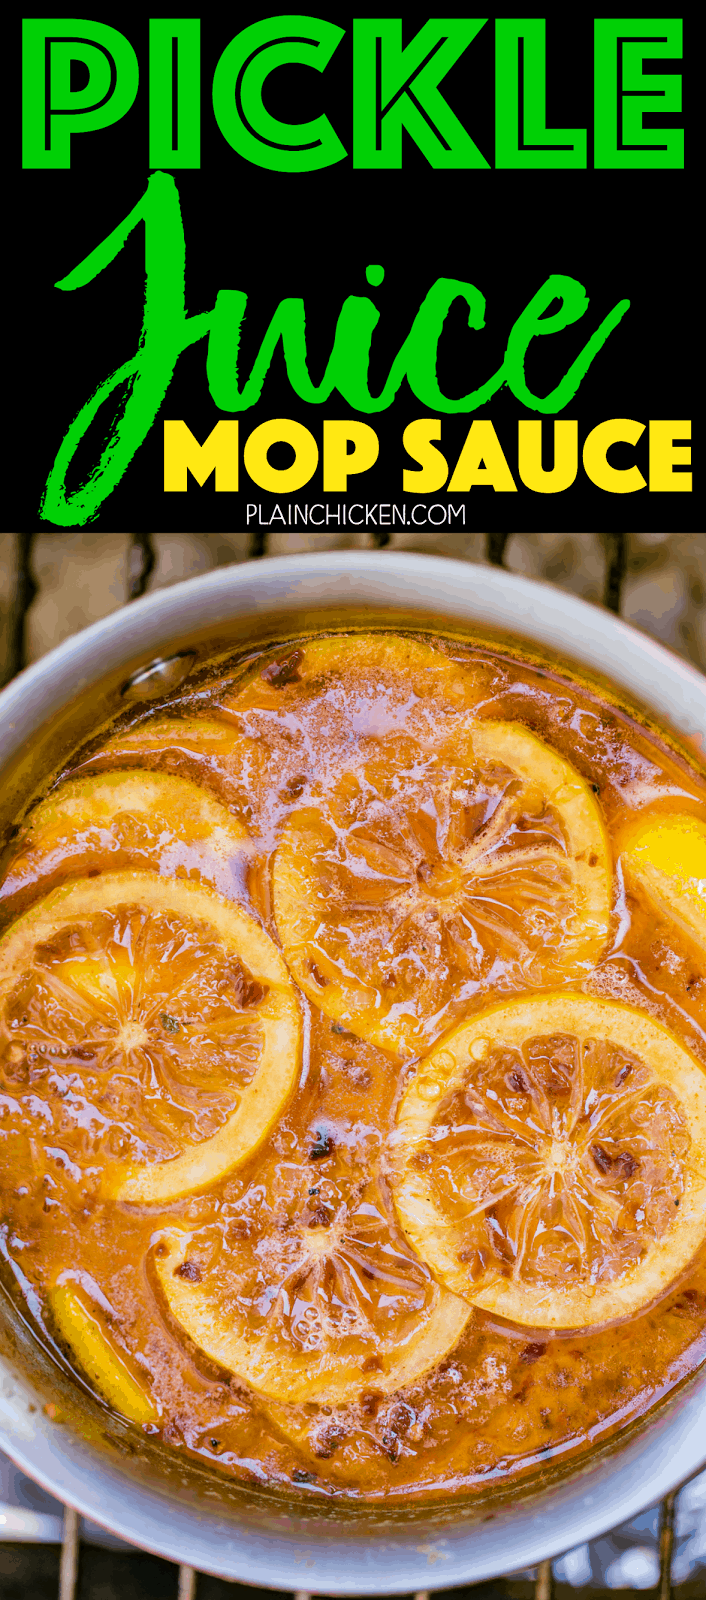 Pickle Juice Mop Sauce - CRAZY good! Great on pork, chicken or steaks. Butter, onion, dill pickle juice, cider vinegar, sugar, lemons, crushed red pepper, cayenne pepper, Worcestershire, salt and pepper. Sweet with a little heat! Can make ahead of time and refrigerate until ready to grill. 